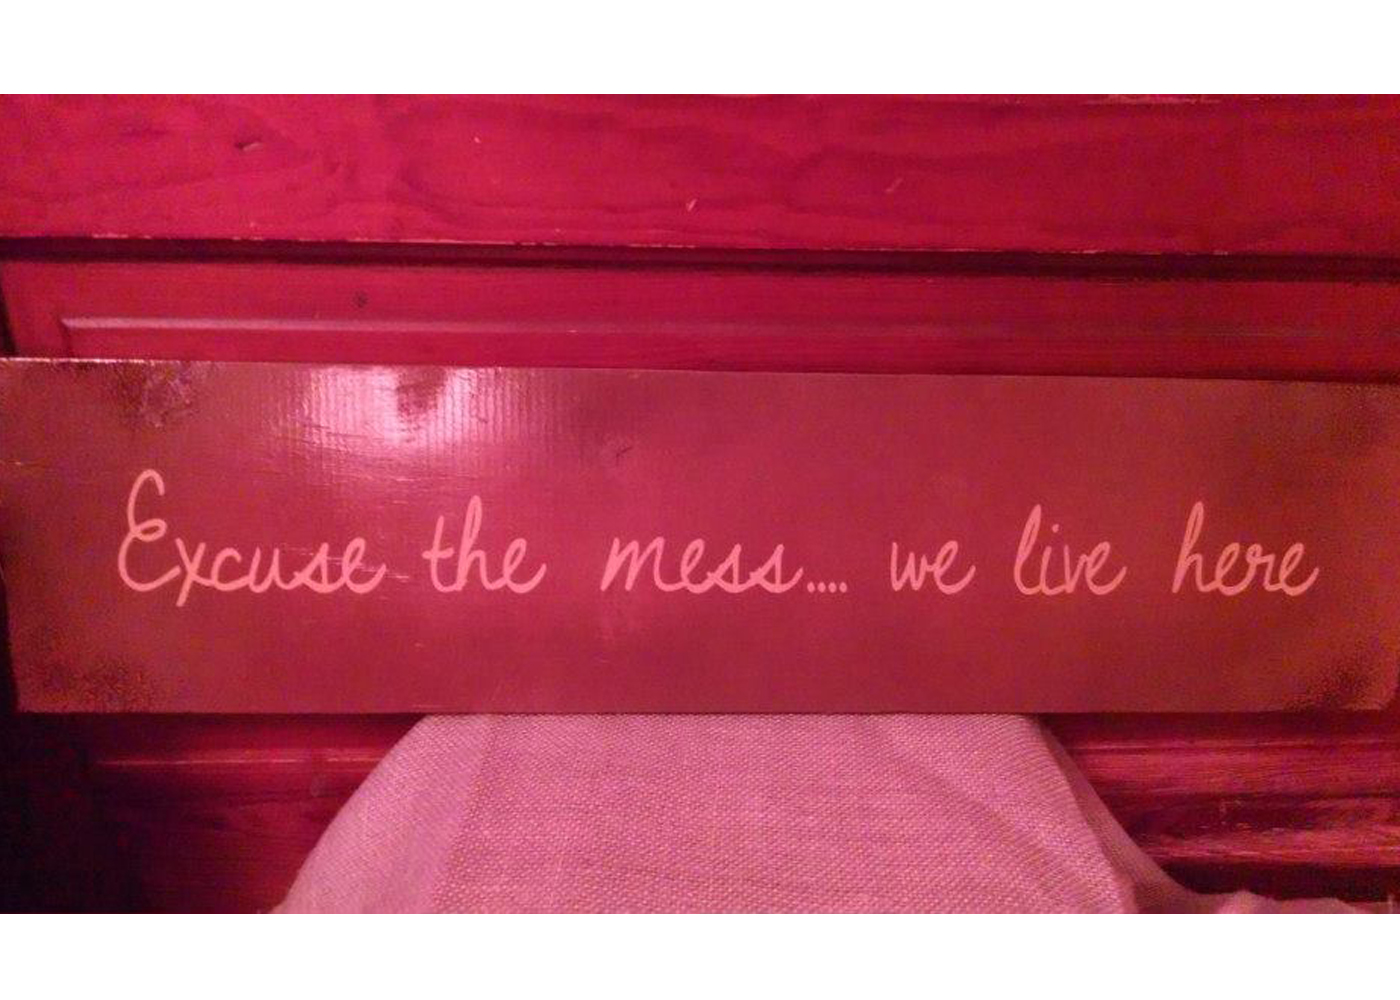 excuse-the-mess-wall-decal-sticker-on-board.jpg